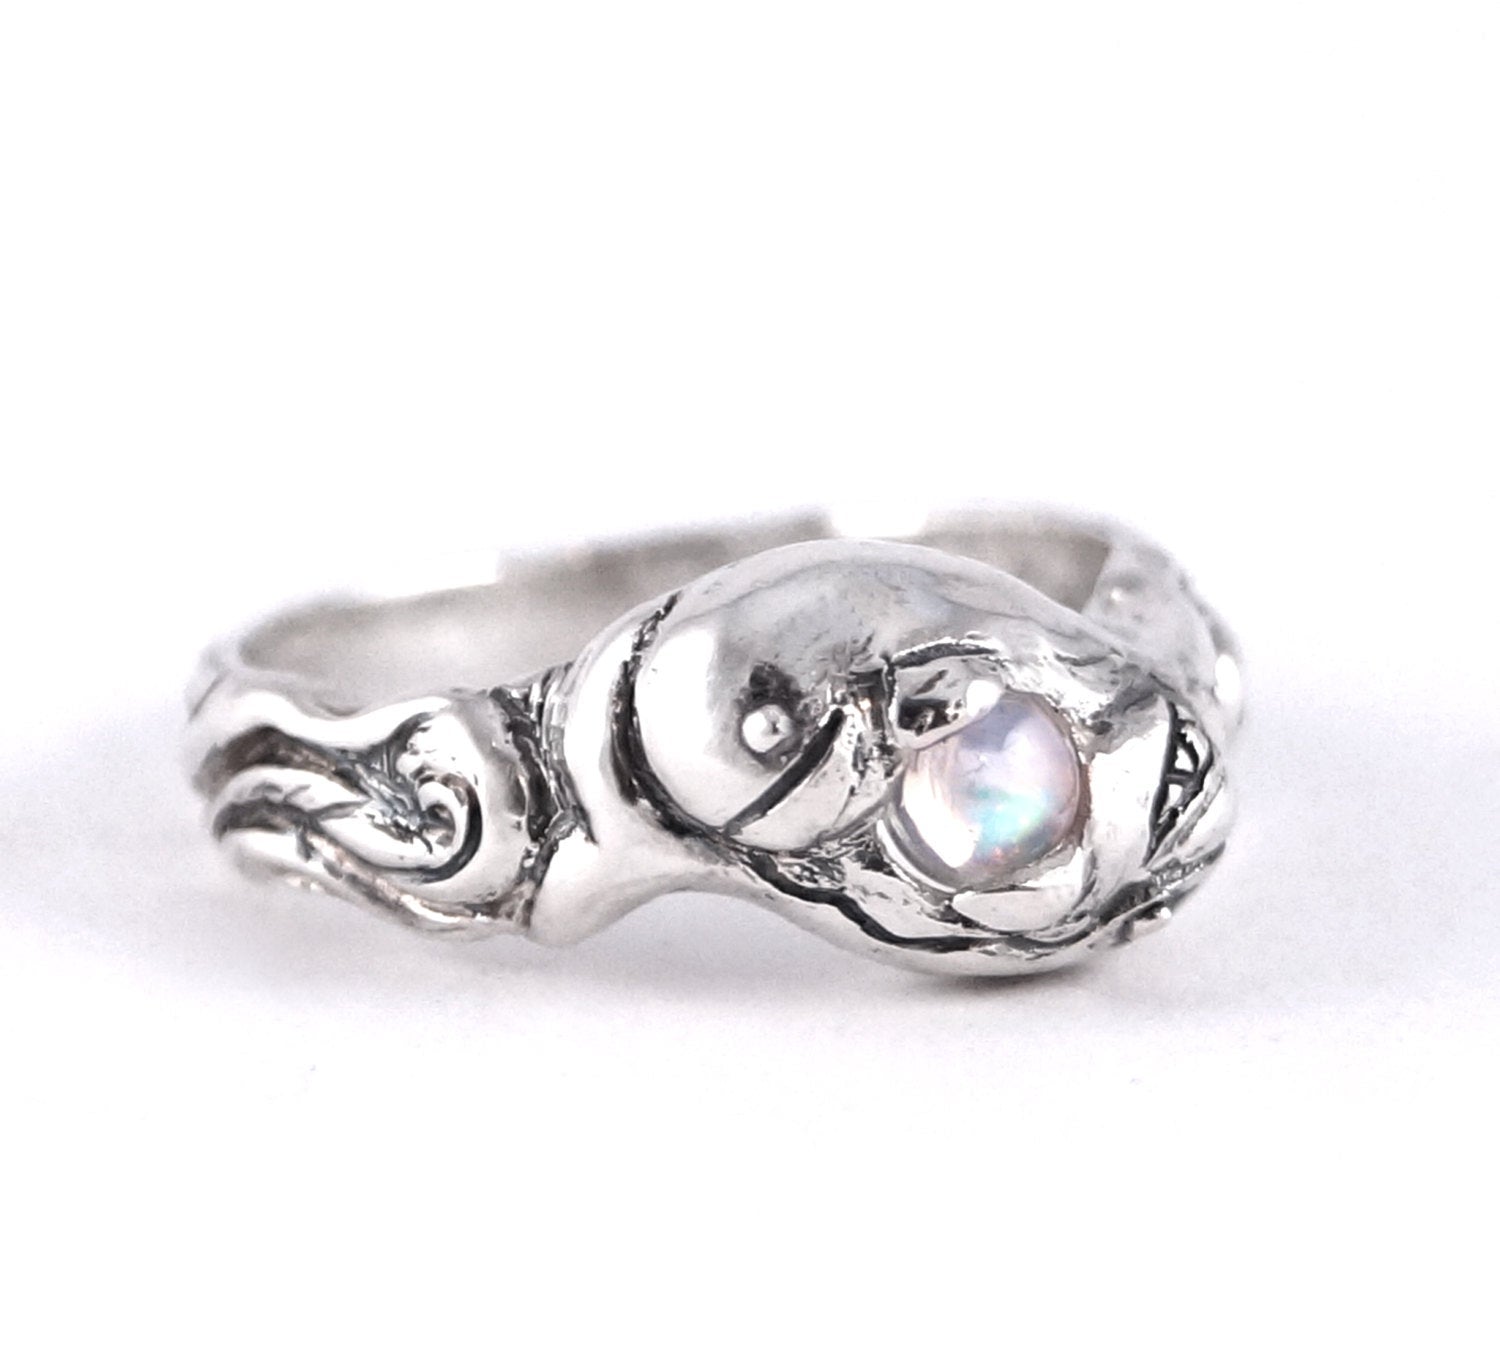 Whale Ying Yang Moonstone Ring, Sperm Whale, Beluga Whale, Whale Hug Ring, Ocean Mammal Ring, Marine Sea Life Ring, Silver Whale Ring, 212